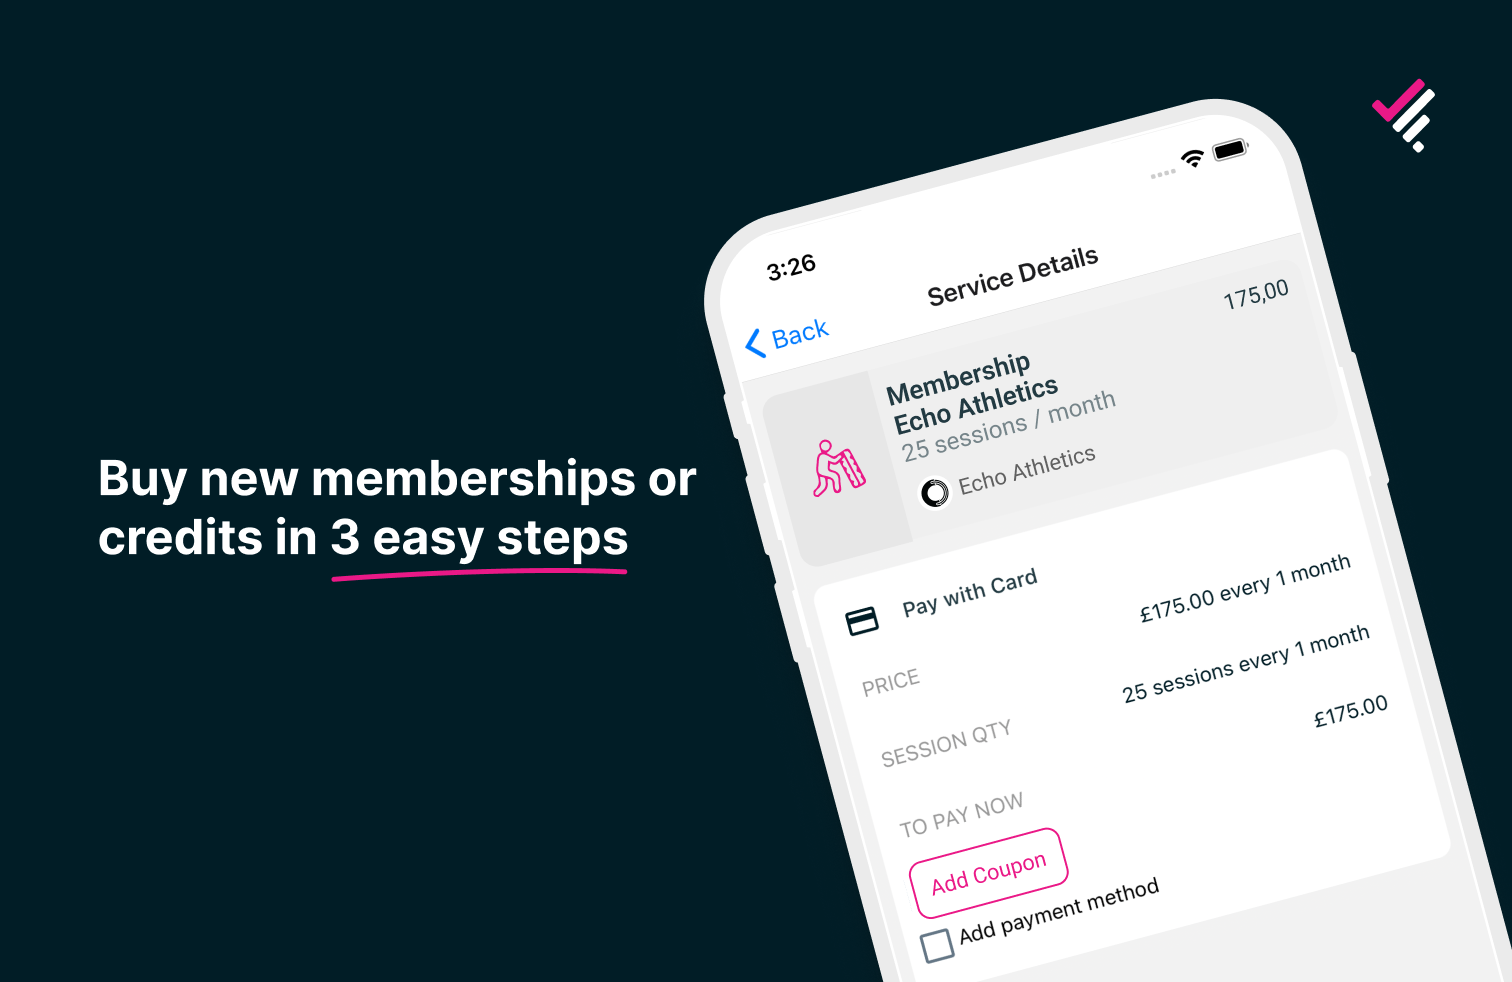 Improve your member experience by making memberships easily available for purchase